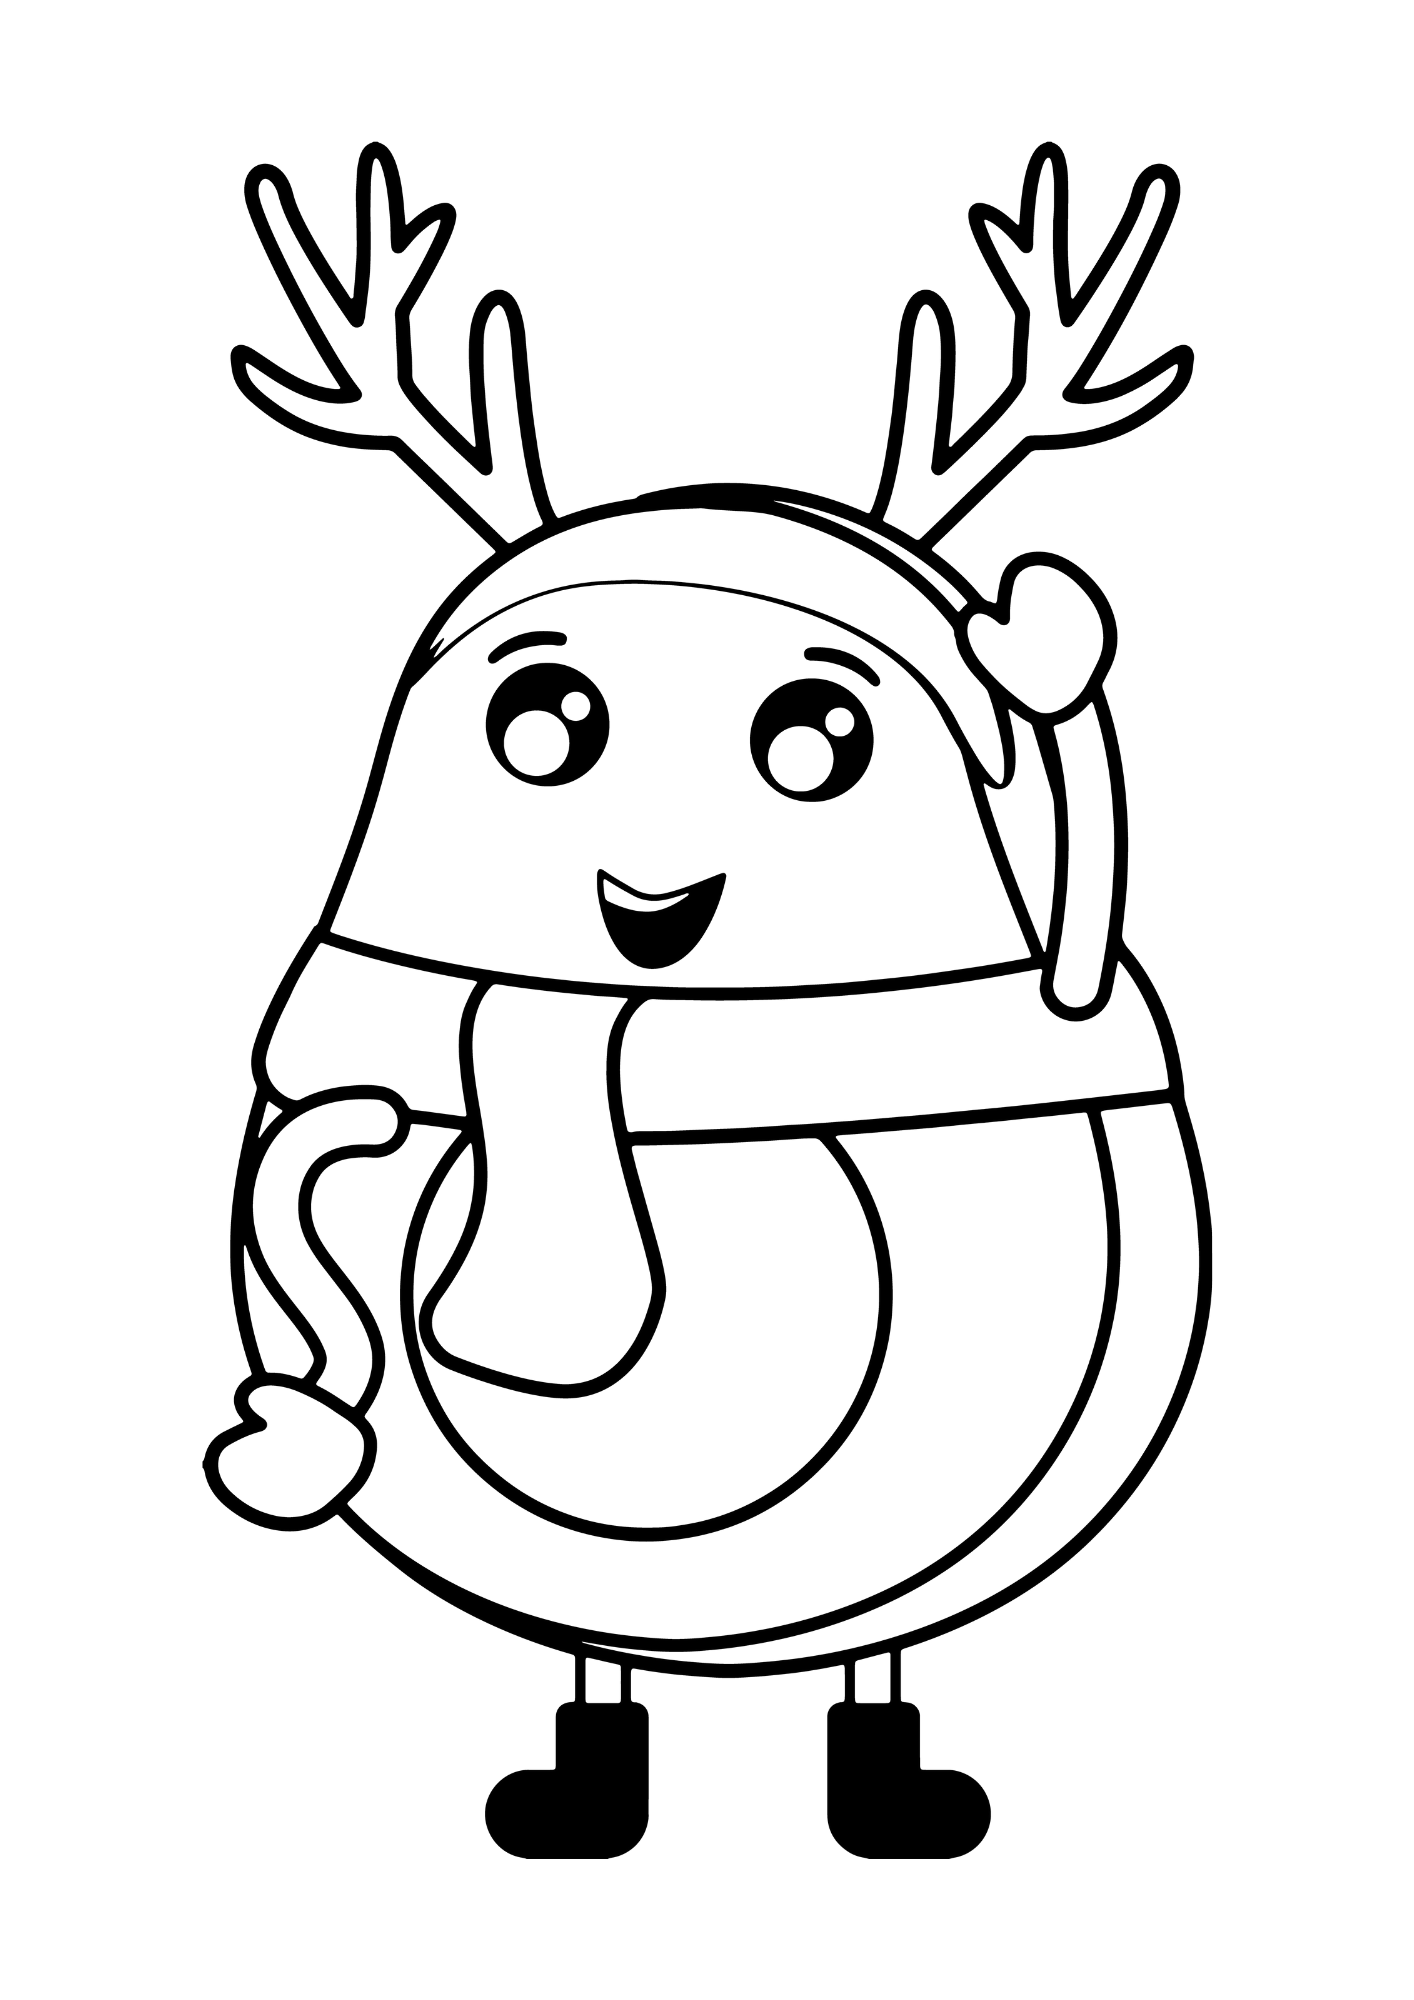 Christmas Avocado For Children Coloring Pages